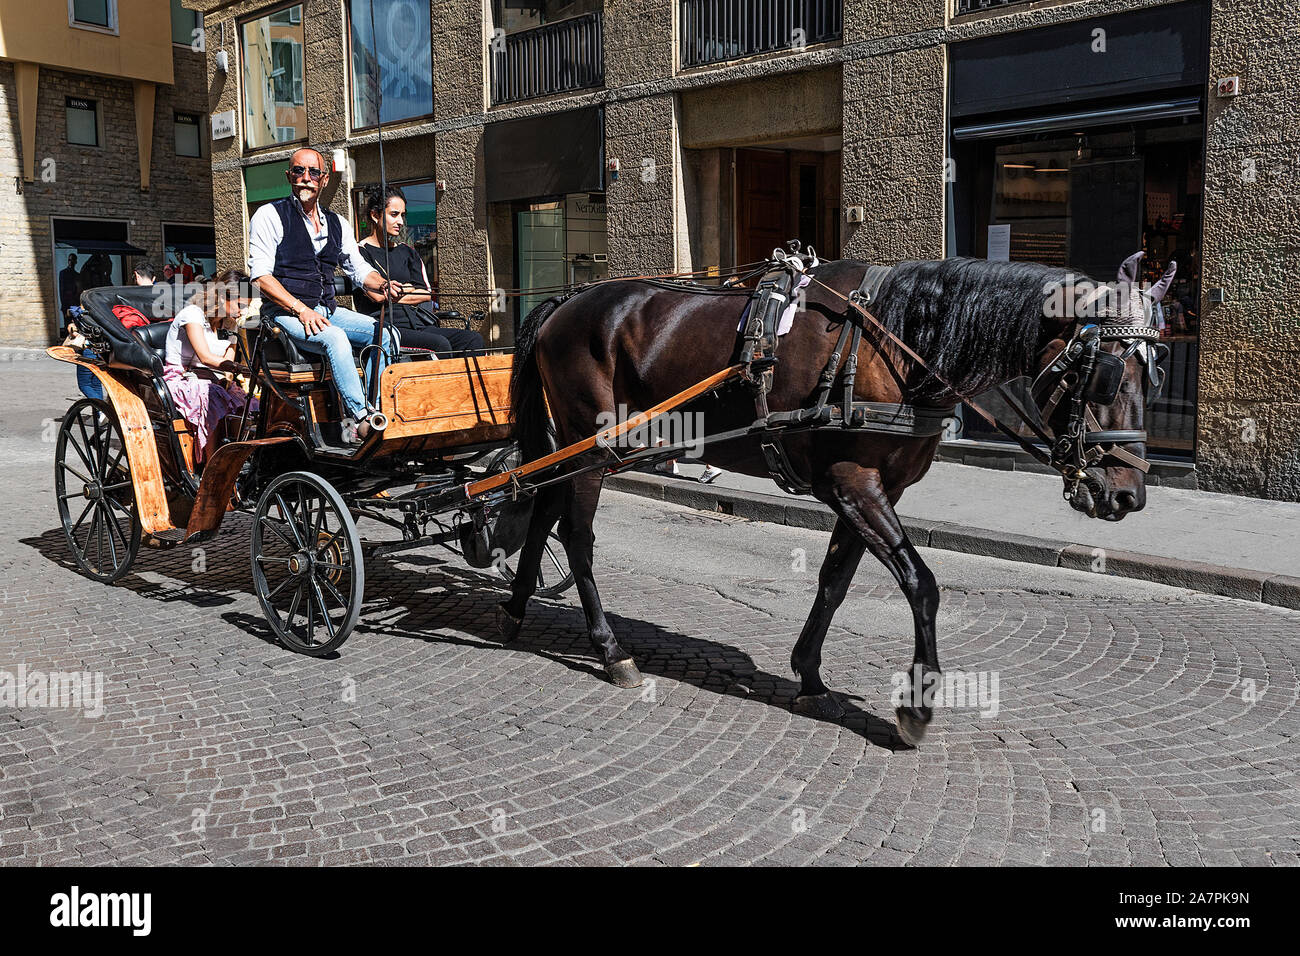 horse drawn carriage ride in the tuscan city of florence, italy. Stock Photo